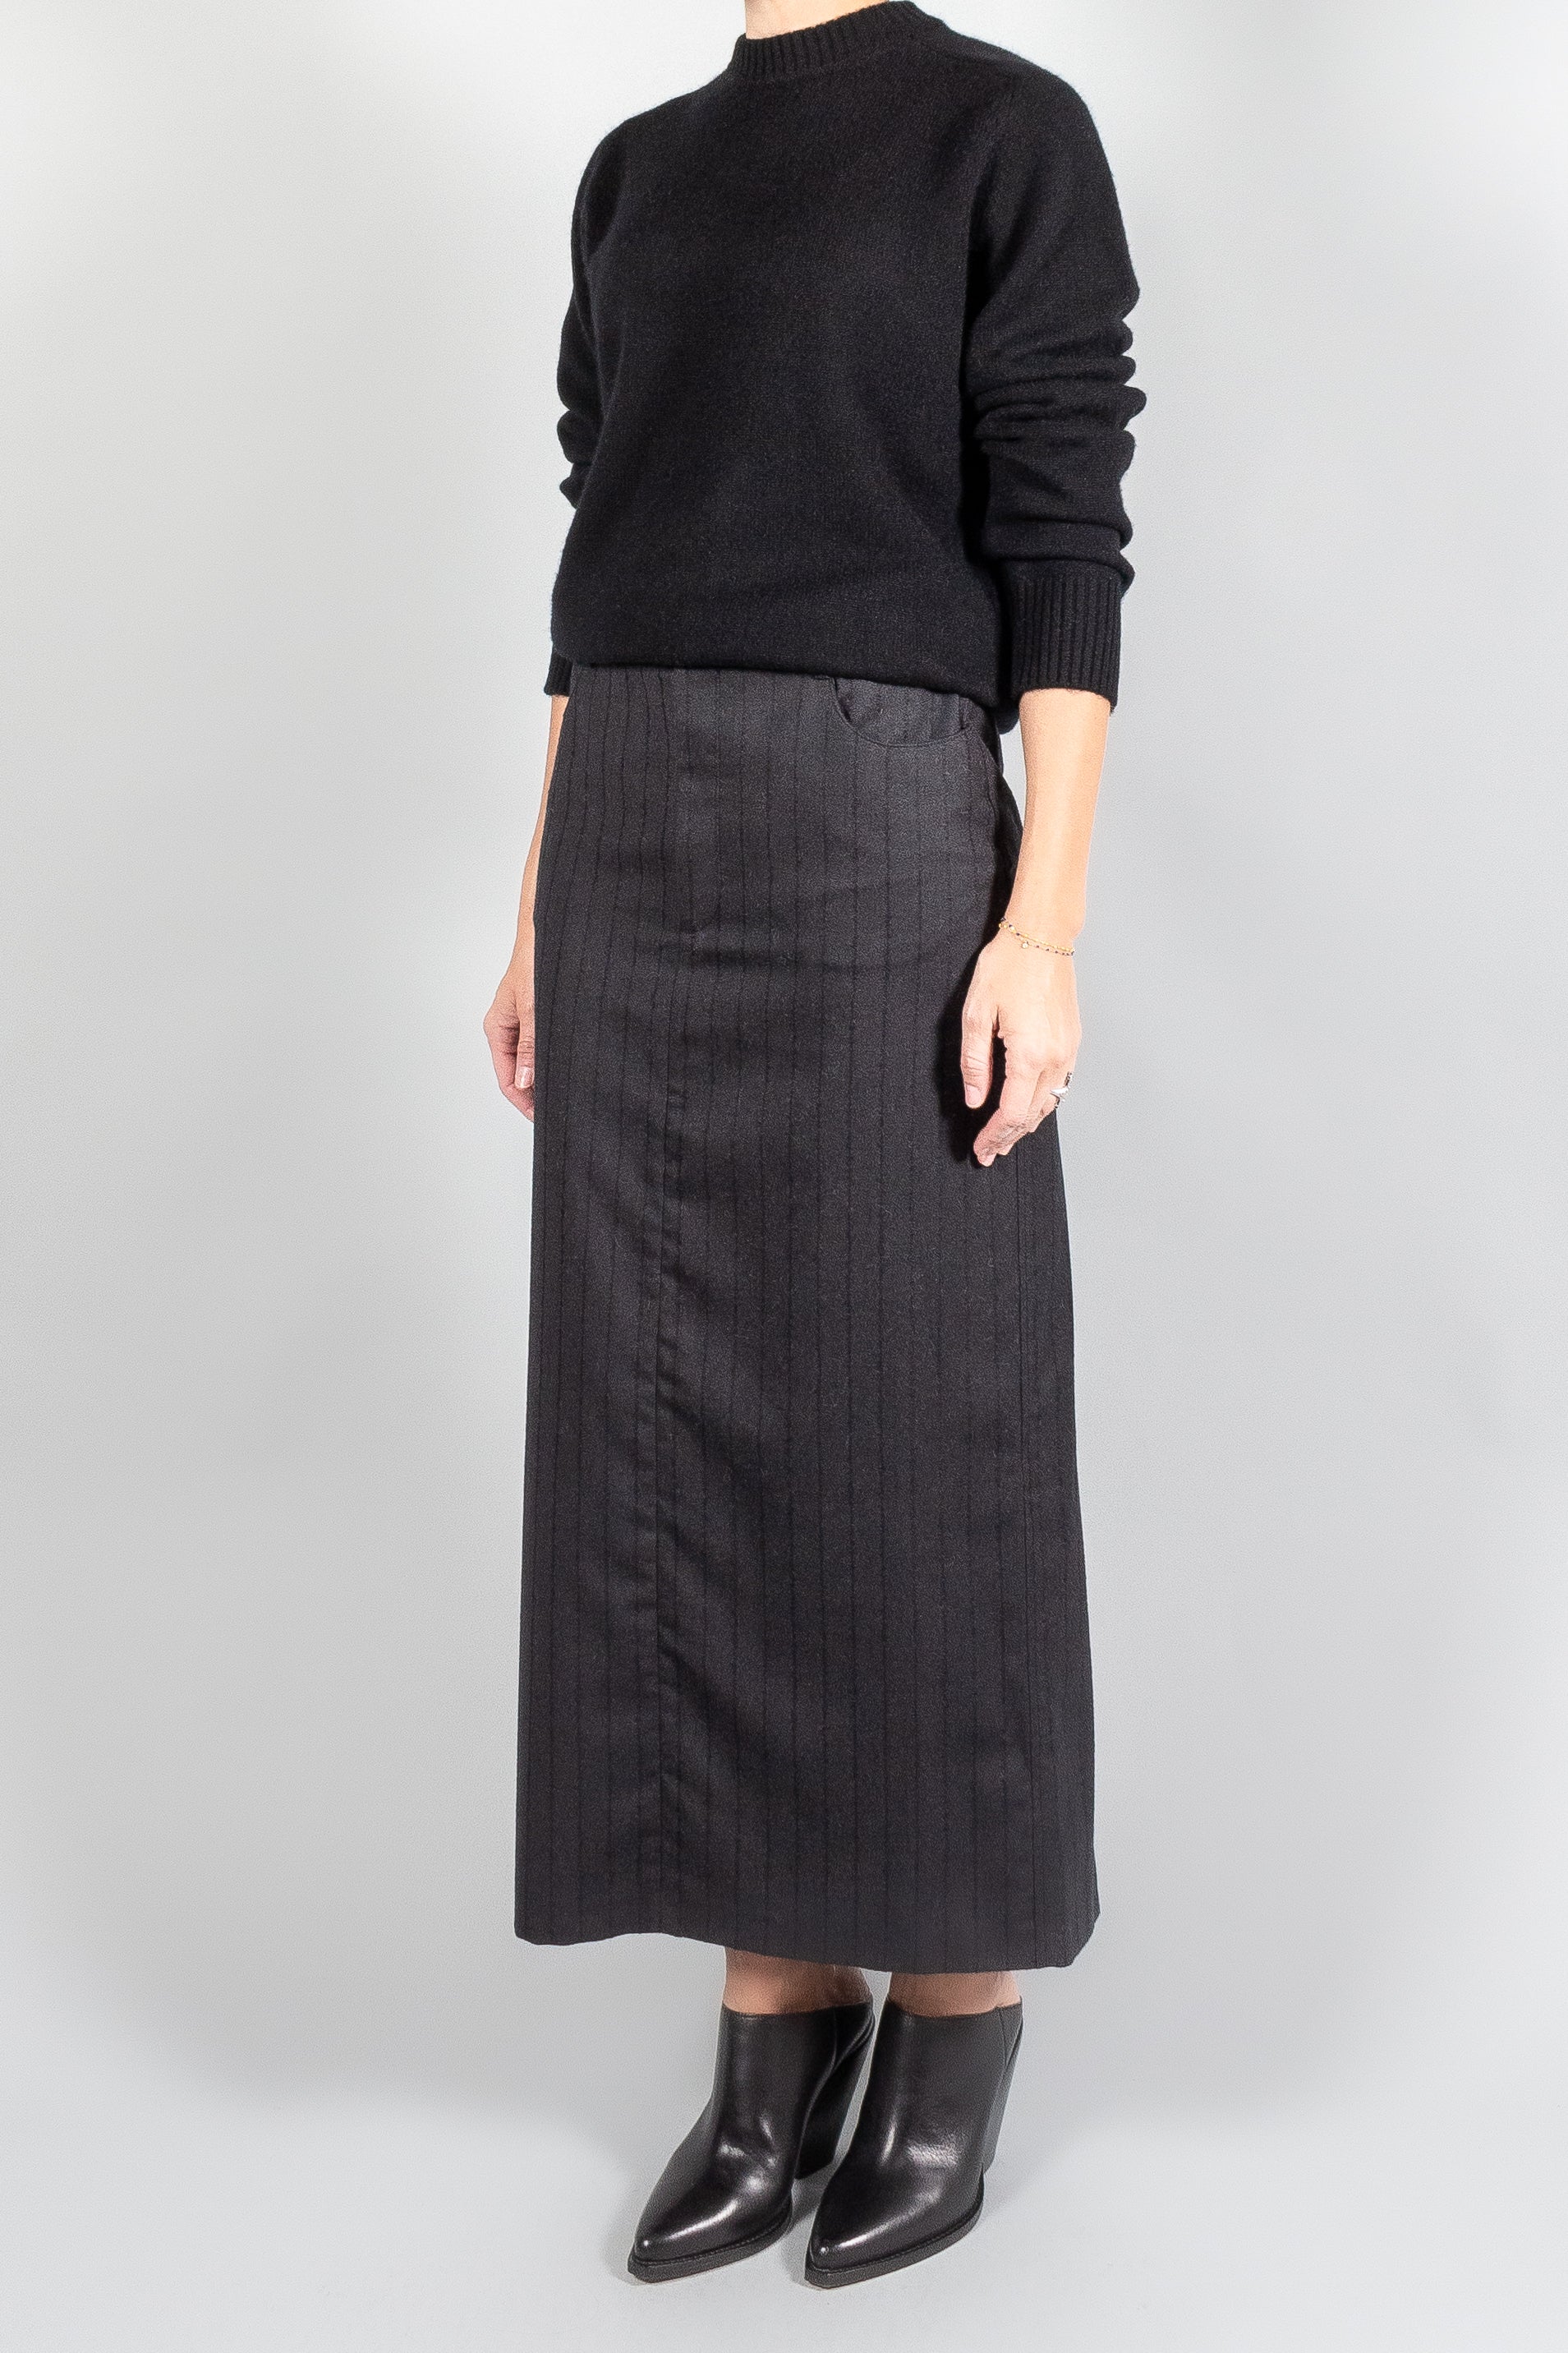 Loulou Studio Vato Long Skirt-Skirts-Misch-Vancouver-Canada